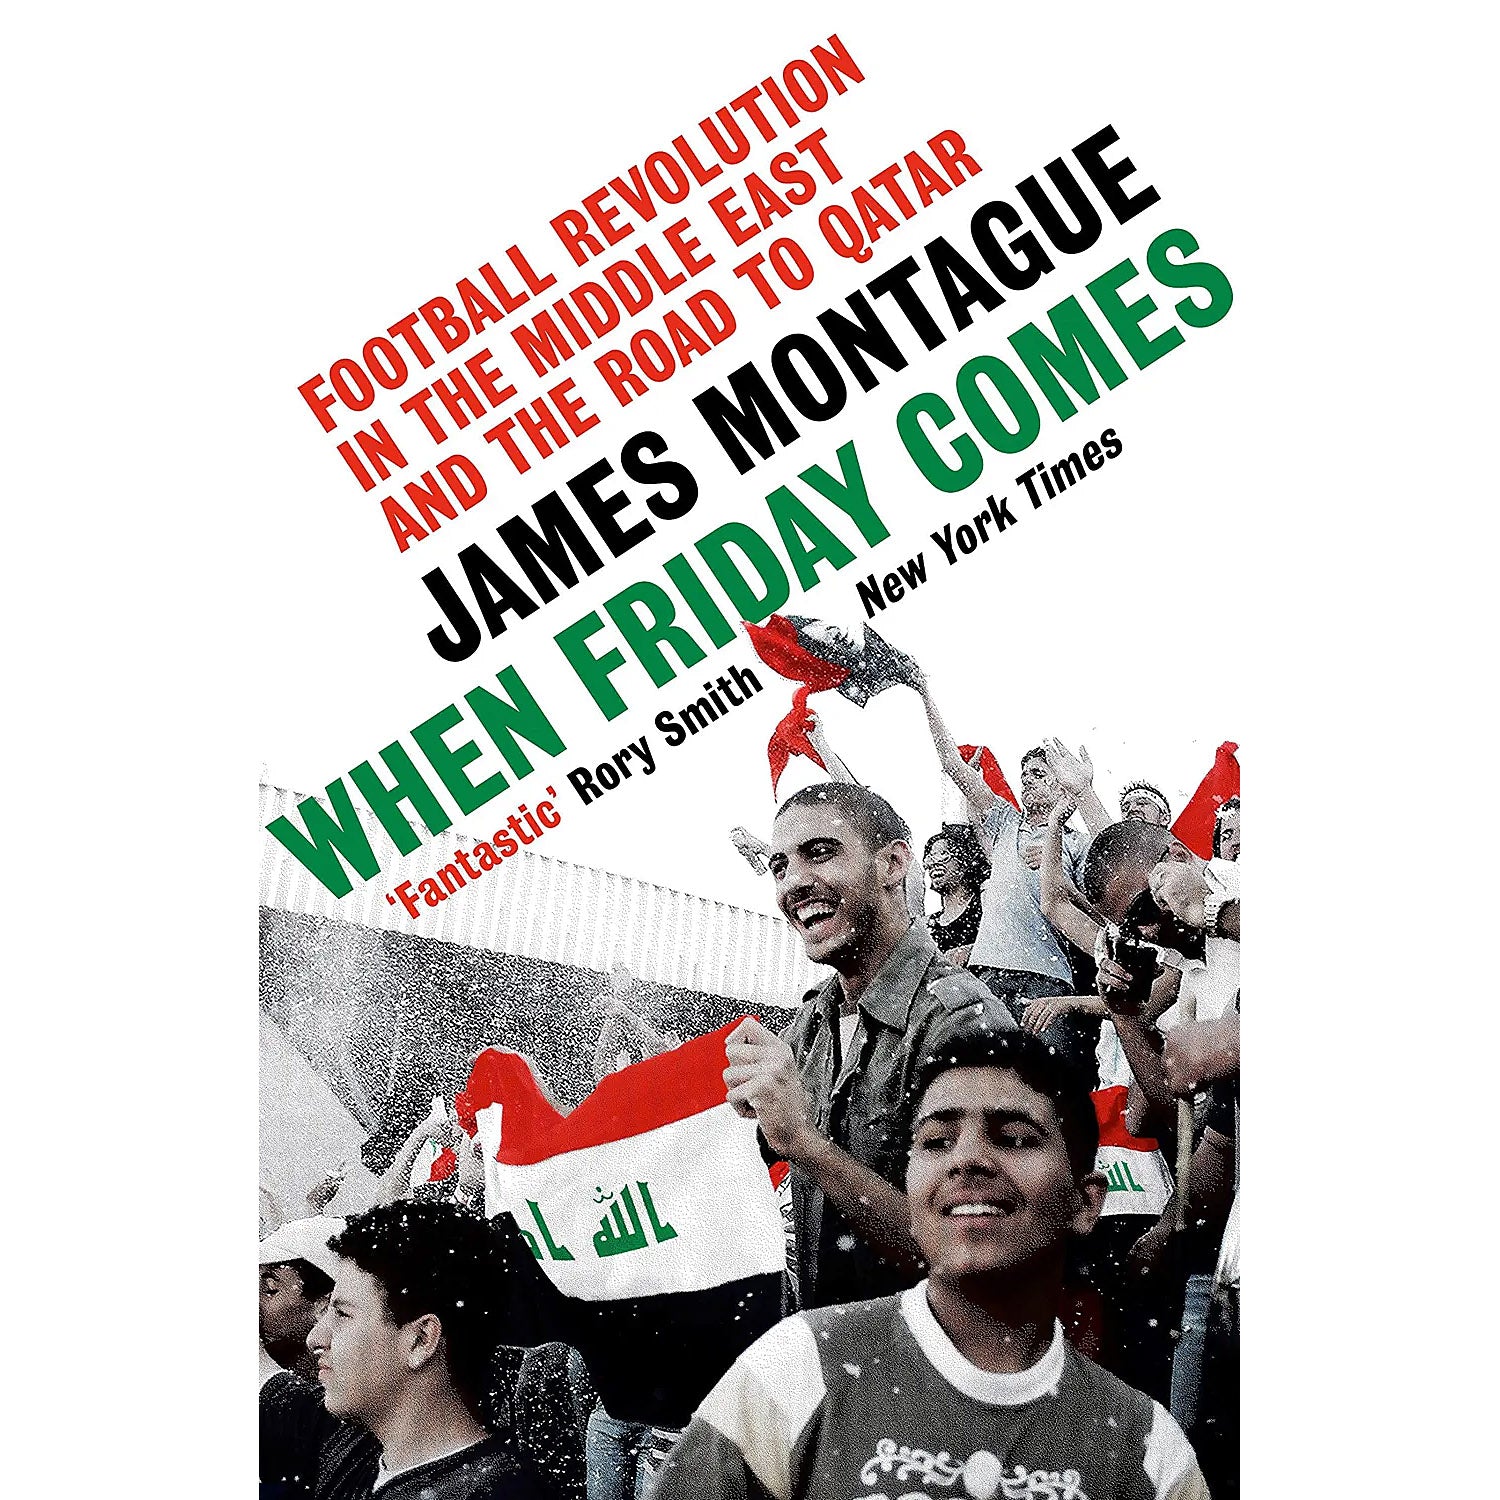 When Friday Comes – Football Revolution in the Middle East and the Road to Qatar